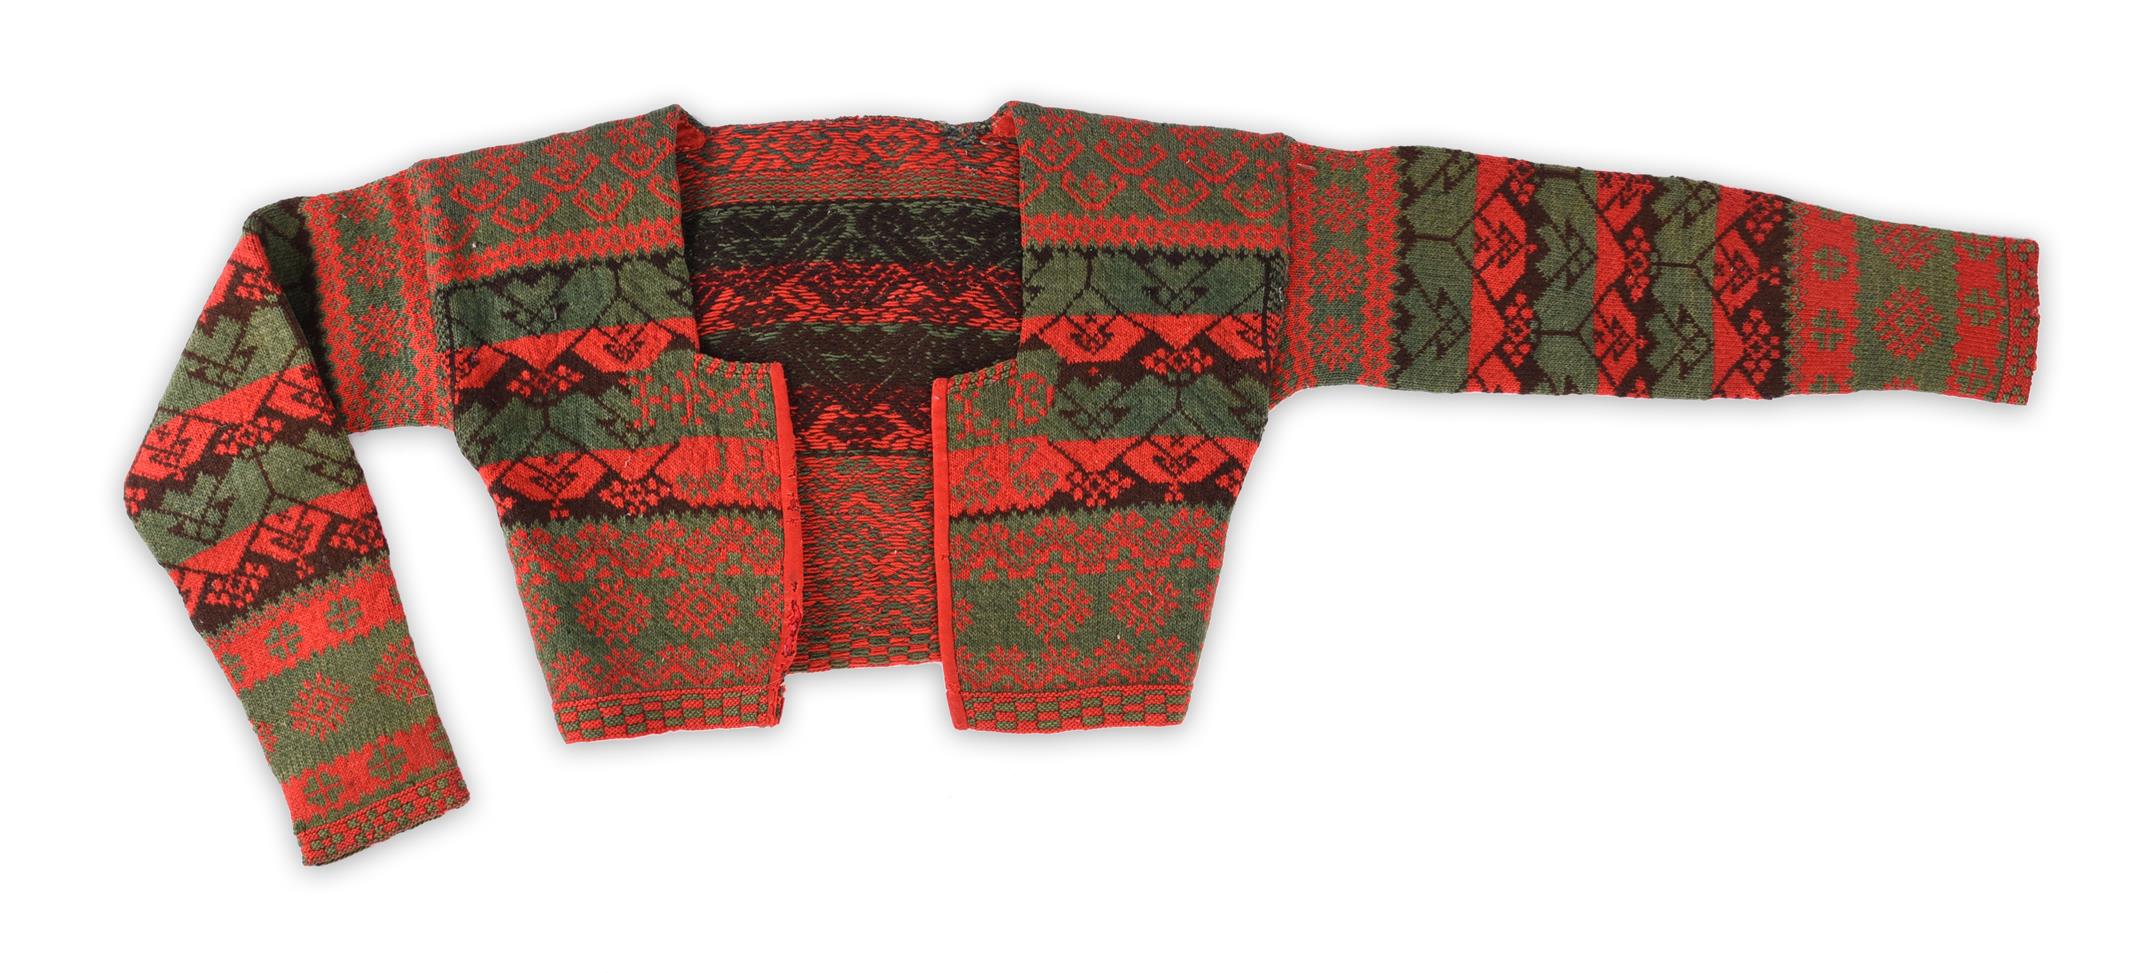 A Swedish childs cardigan dated 1867 red, green and black wool, with initials HM LD and 18 67, 38.